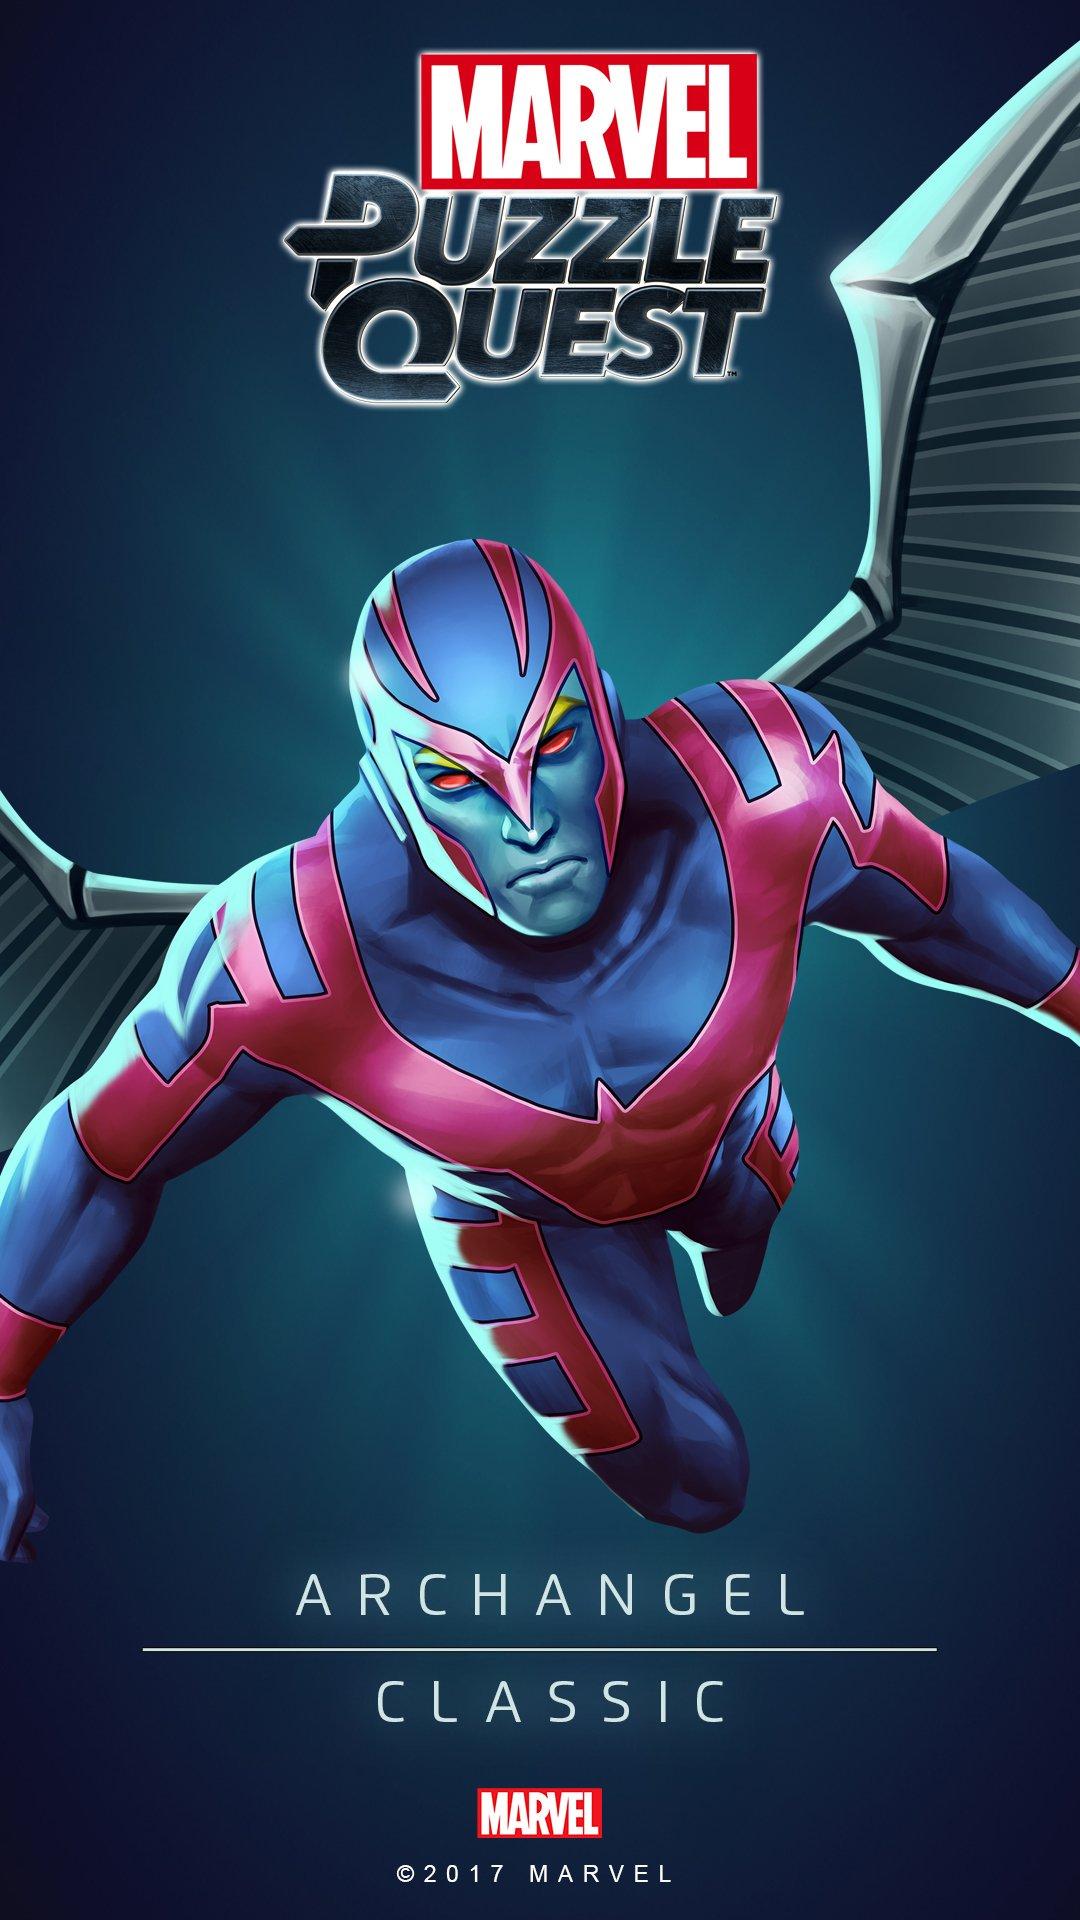 Marvel Puzzle Quest on Twitter: The Angel and Archangel wallpapers